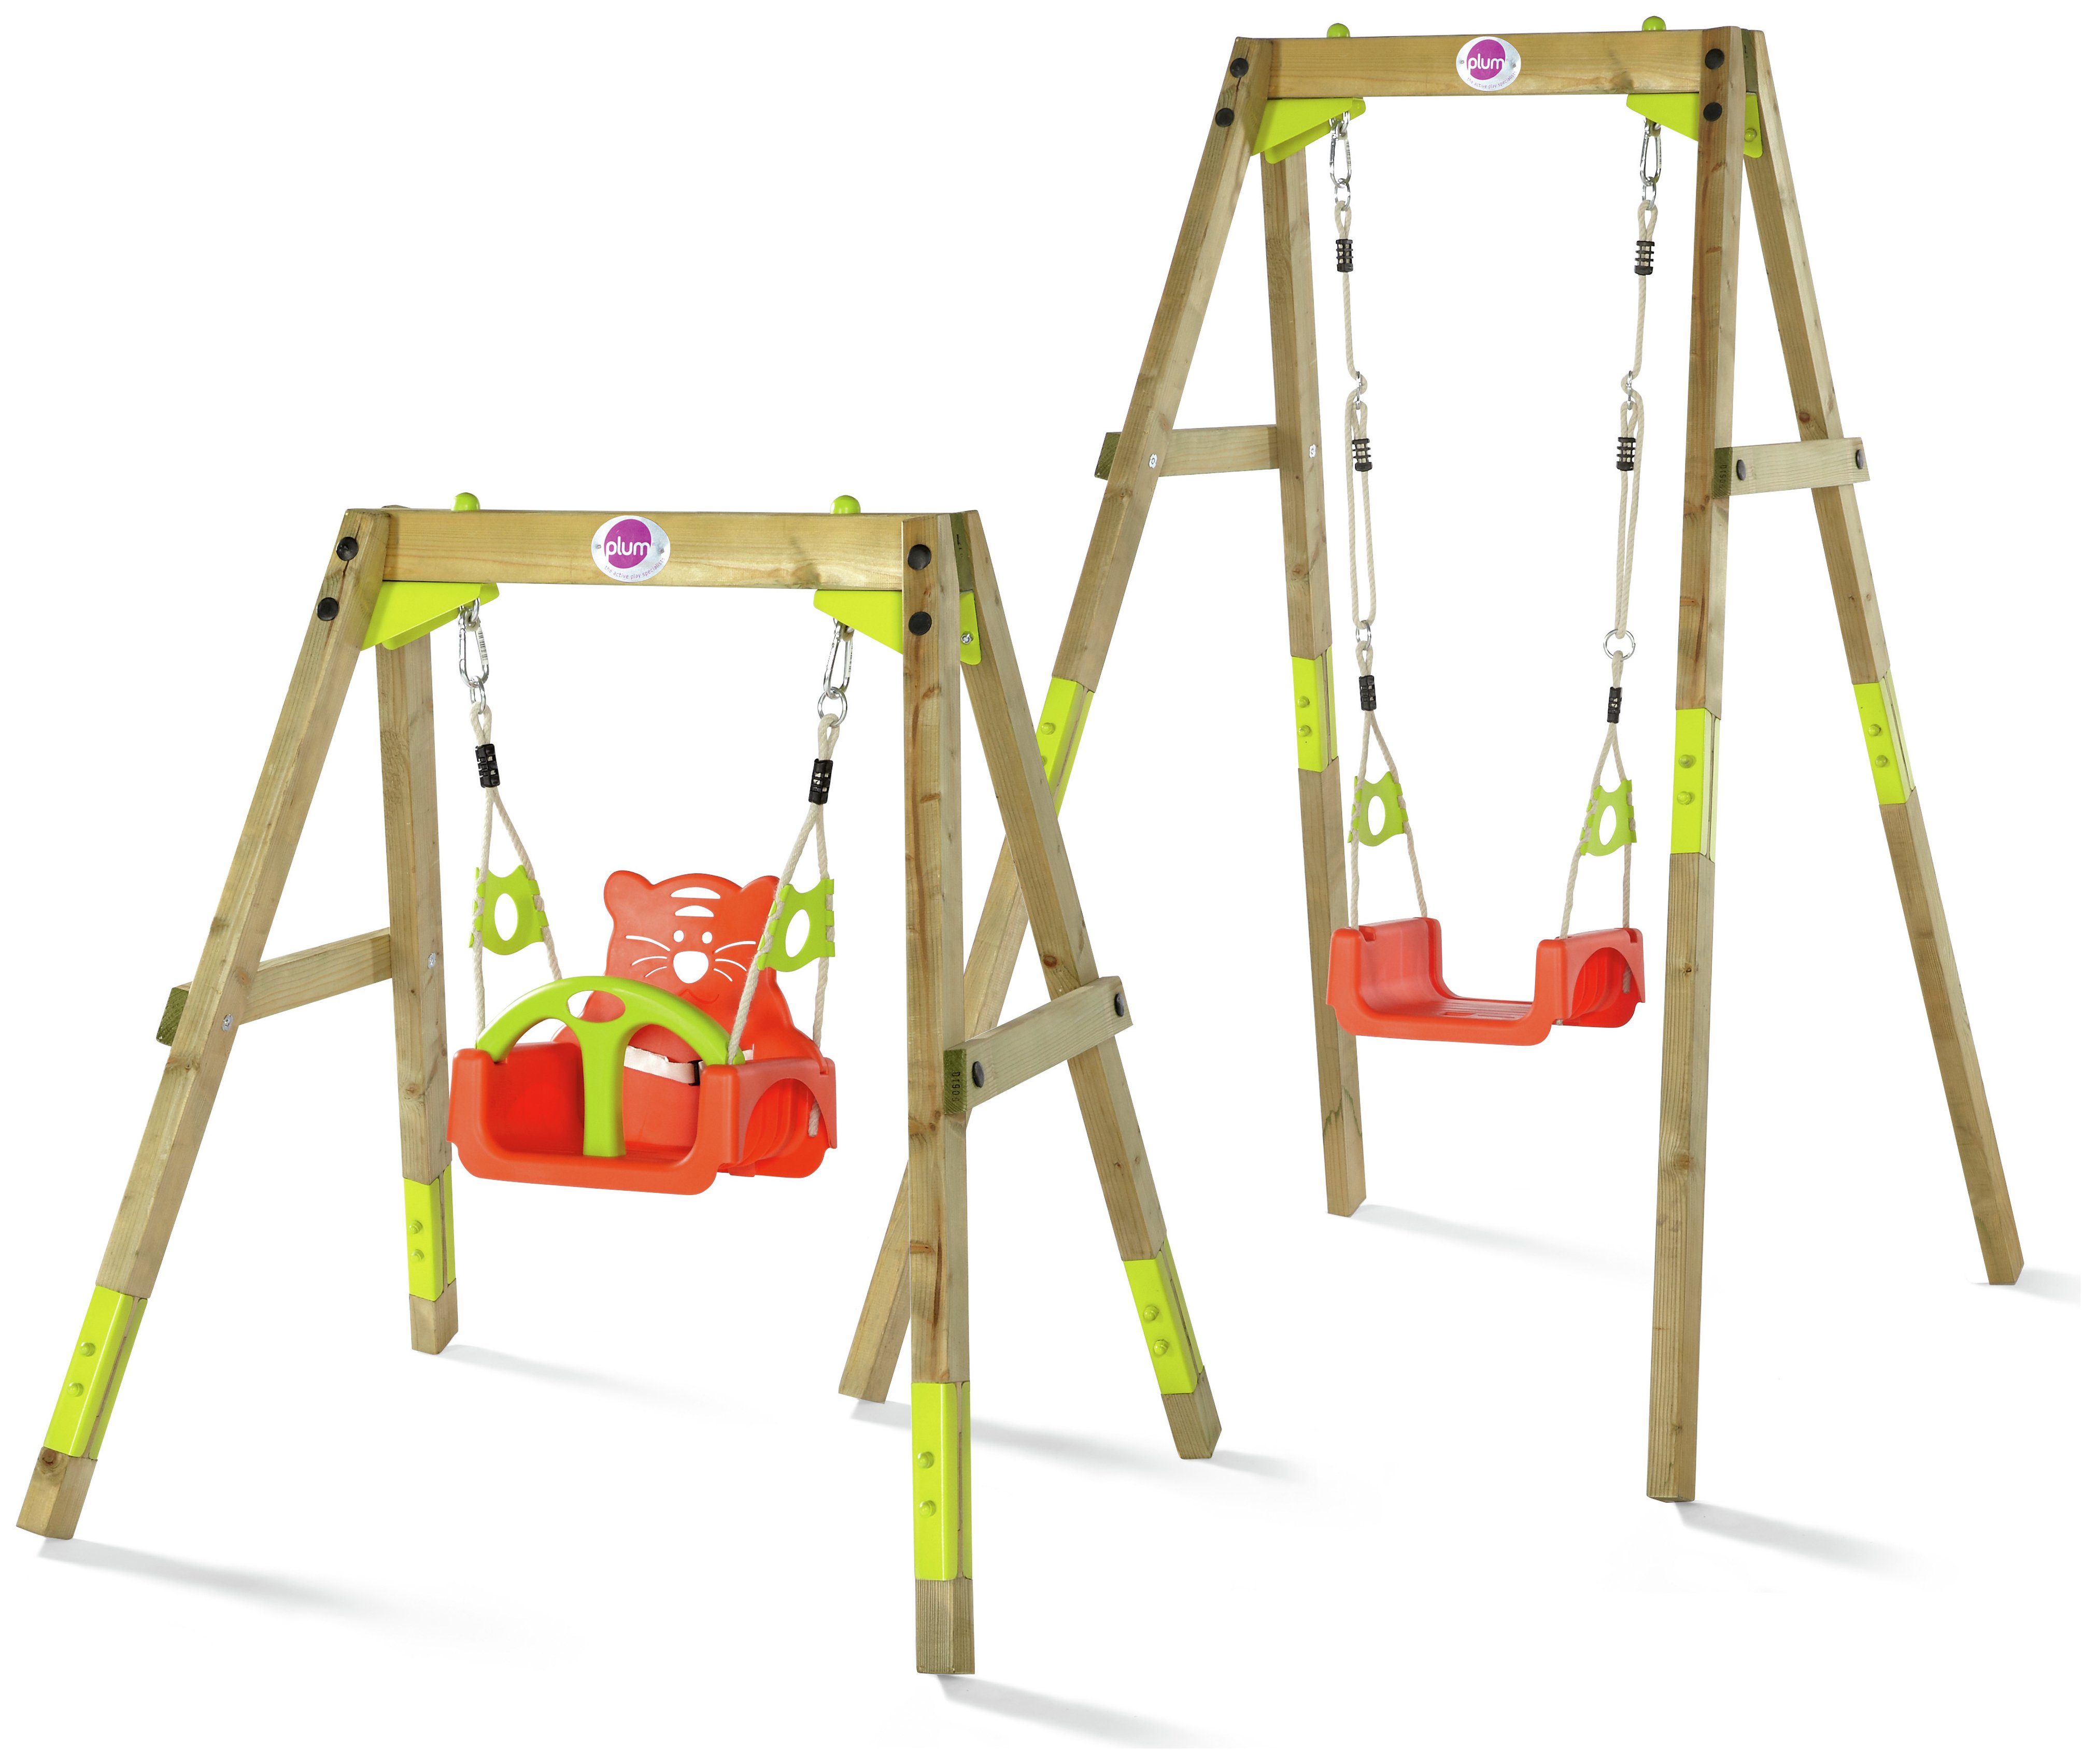 Plum Wooden Growing Swing. Review